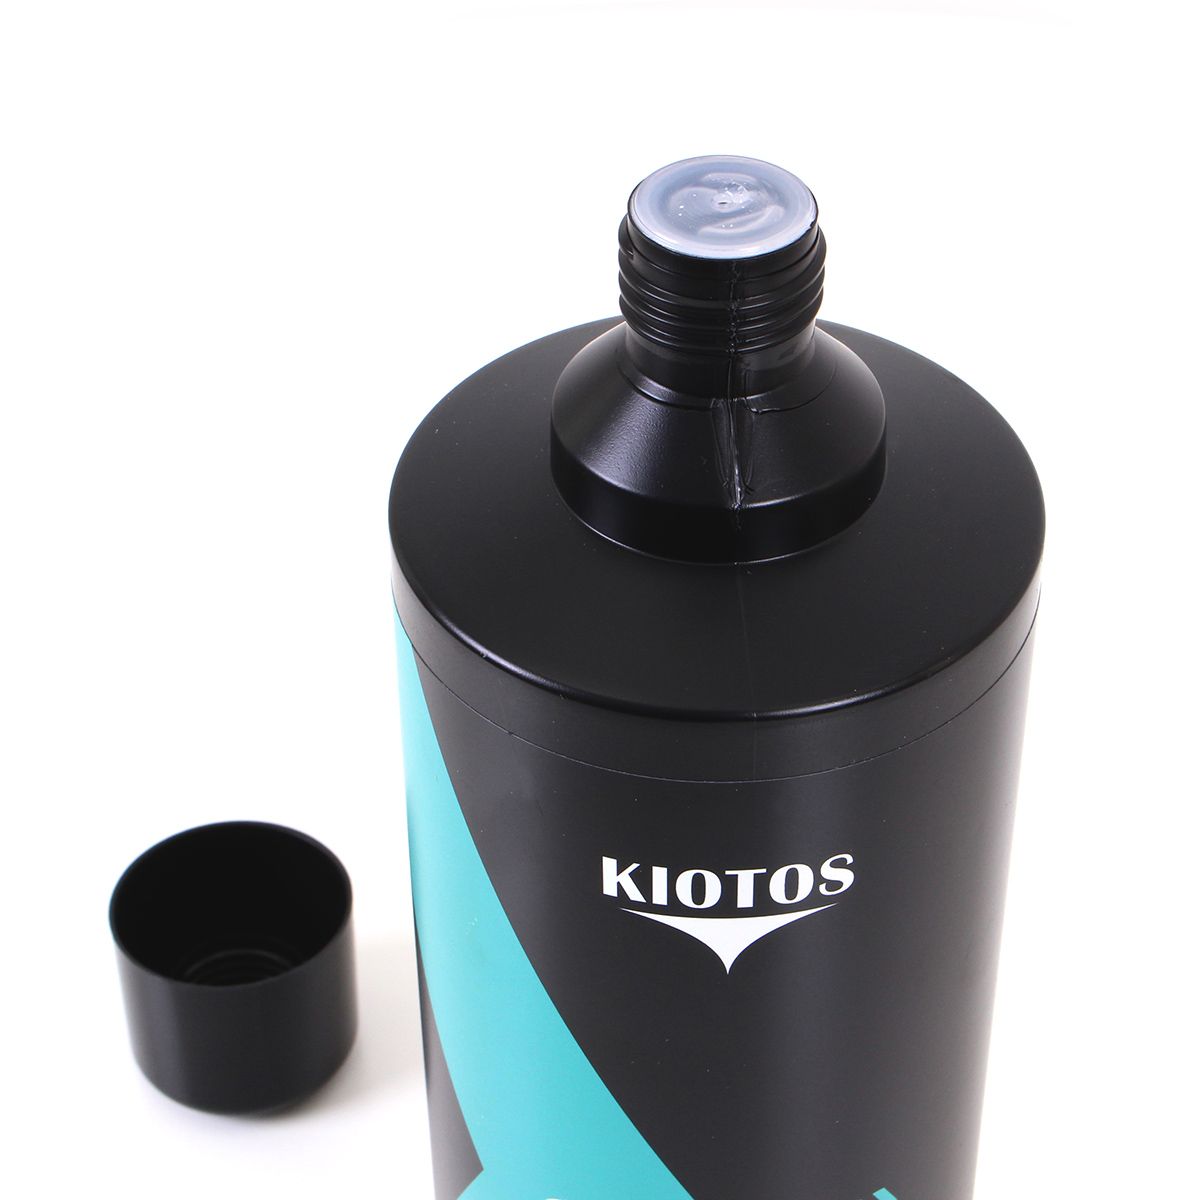 Kiotos water based lubricant